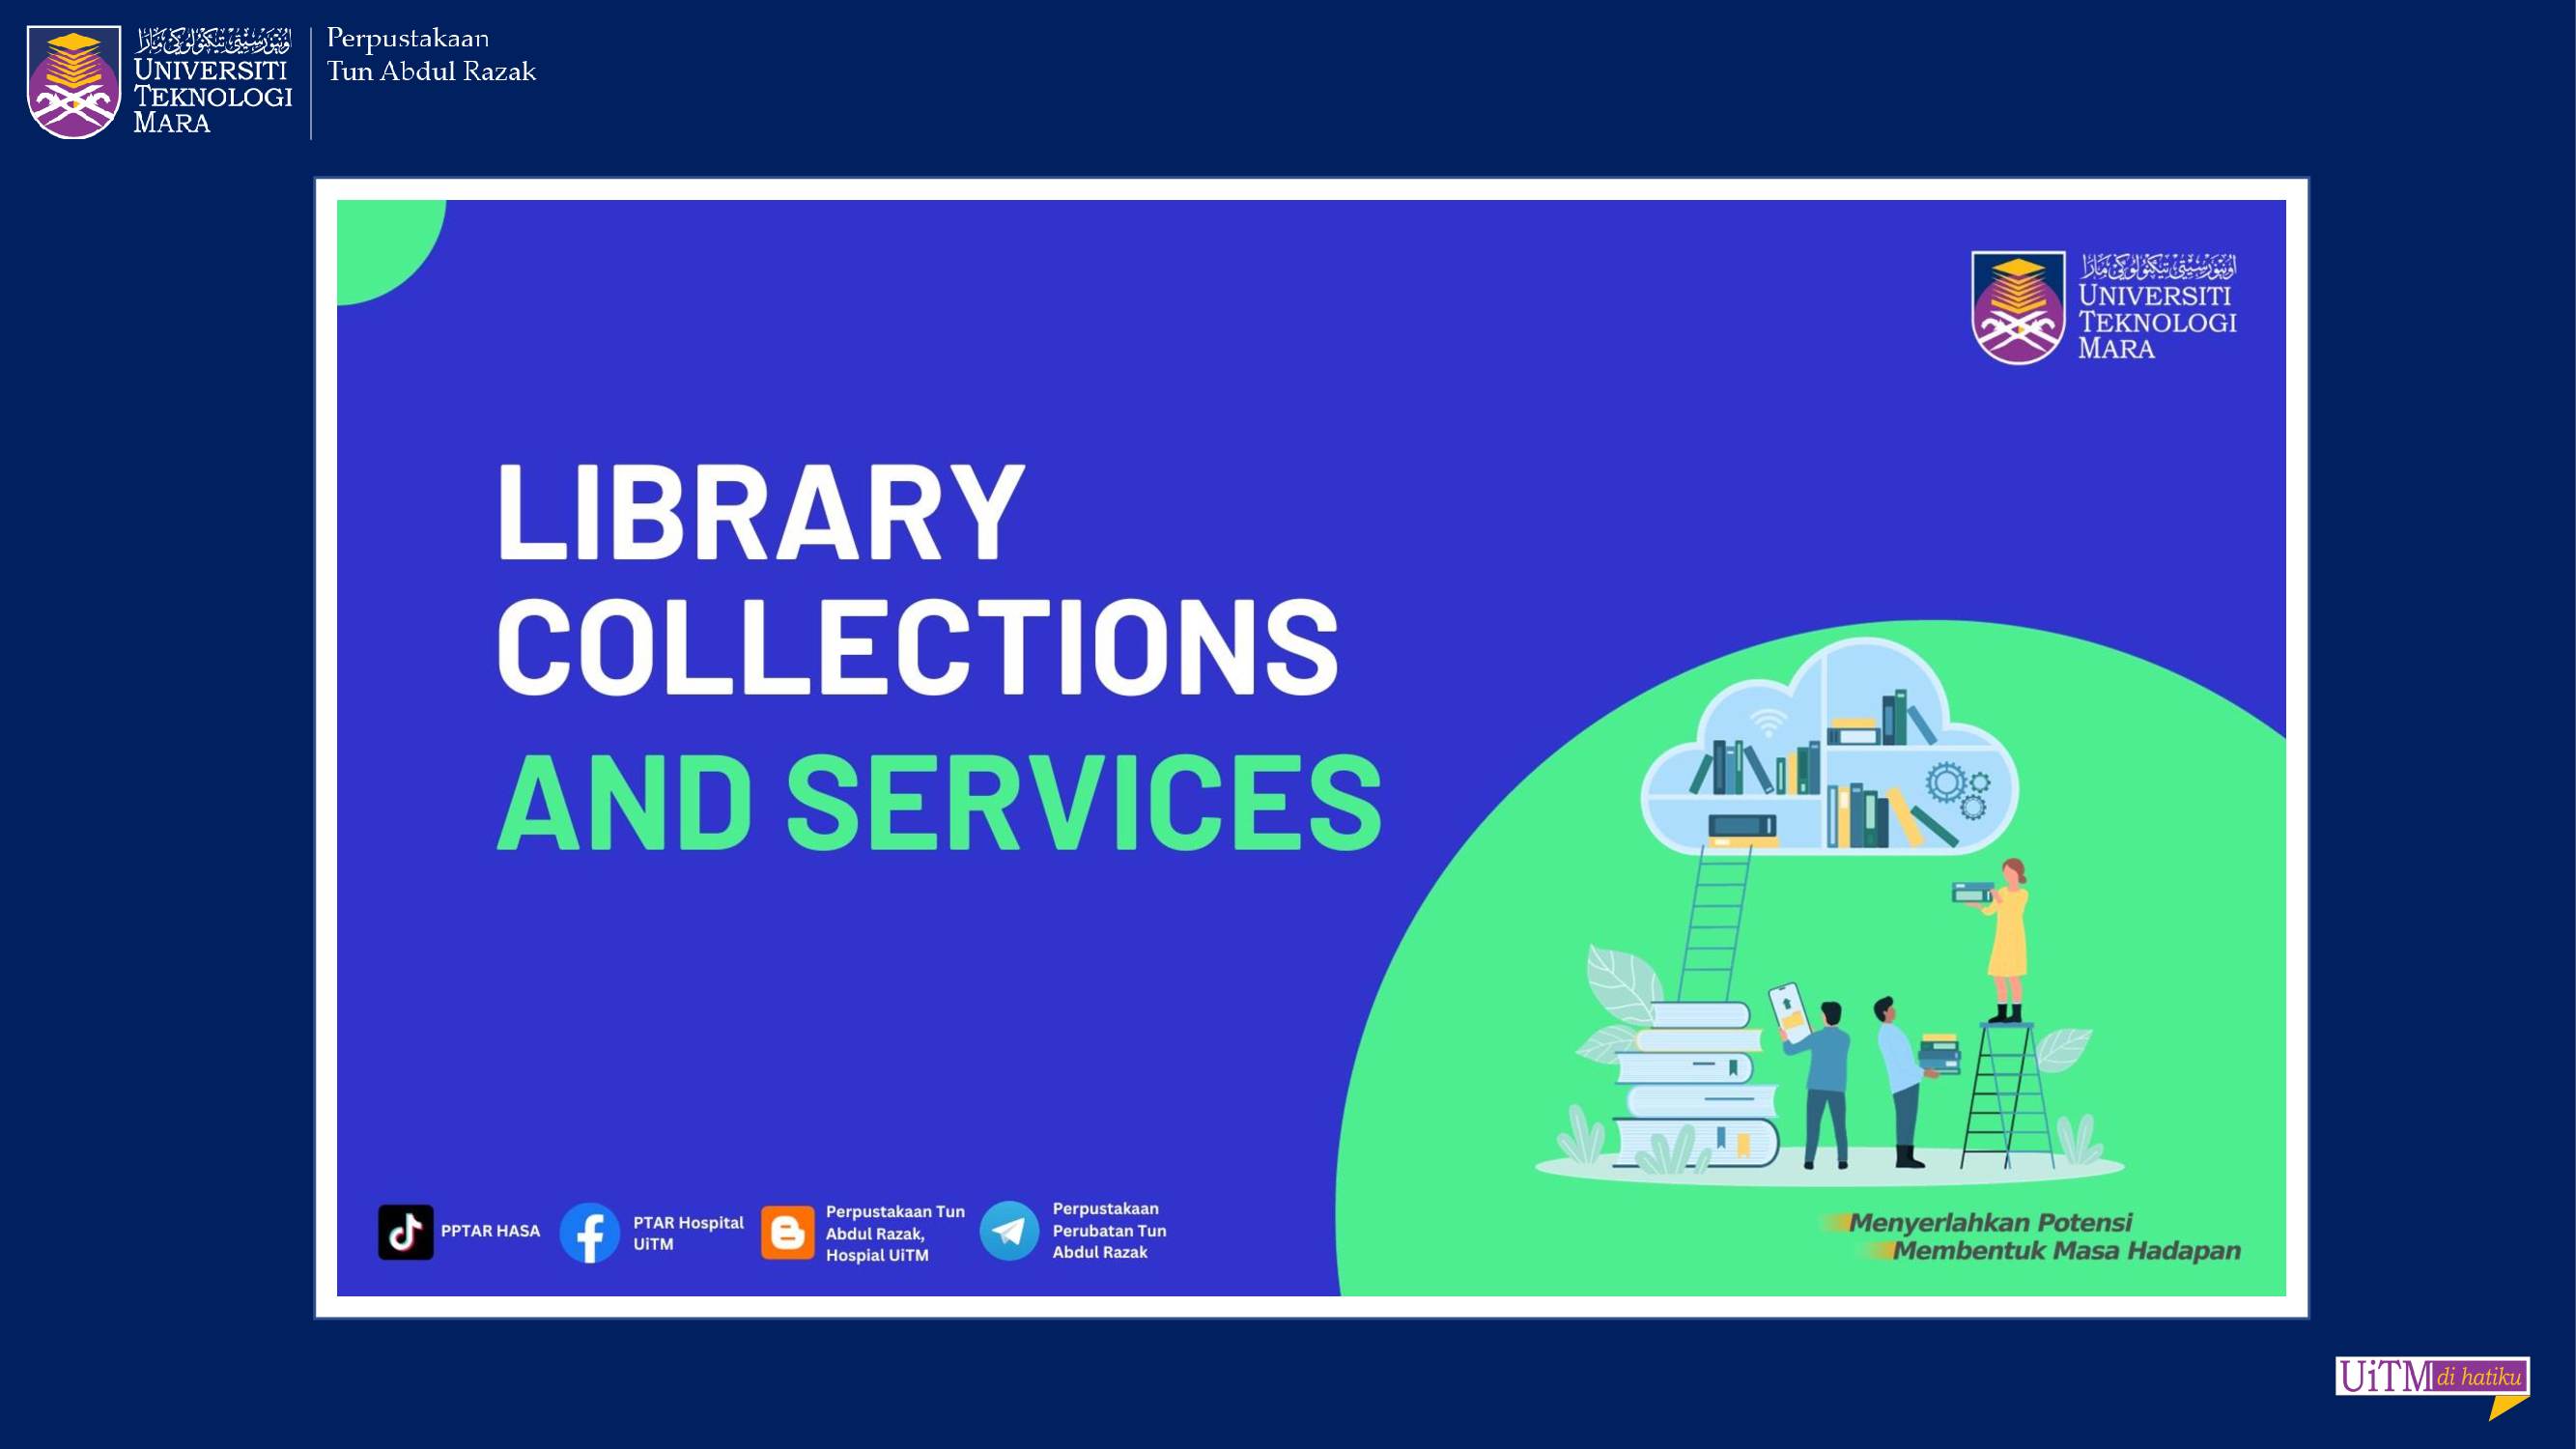 LIBRARY COLLECTIONS AND SERVICES